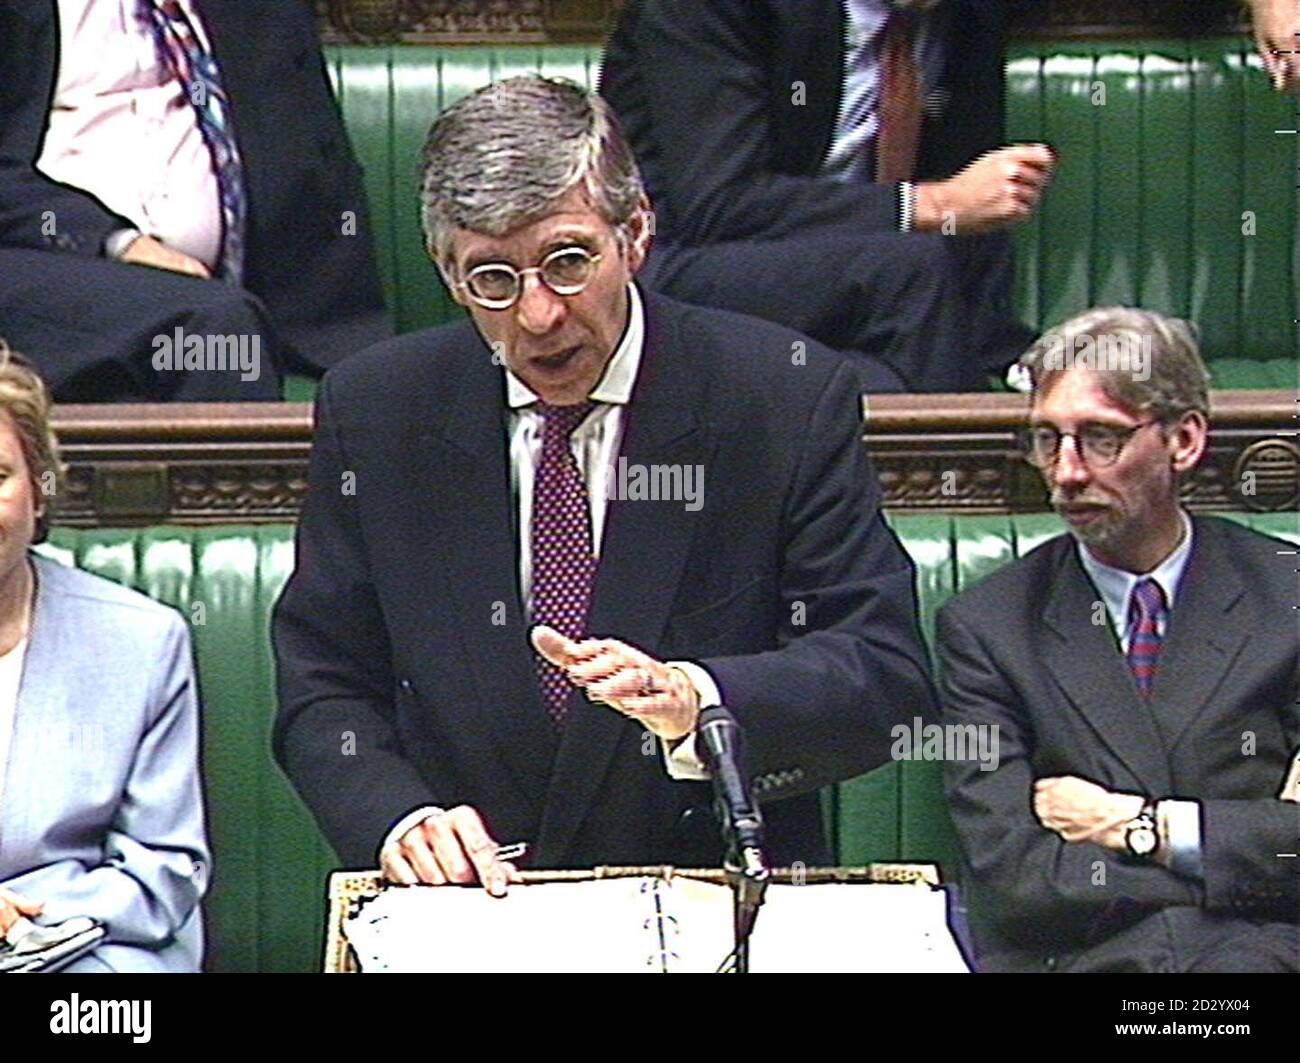 Home Secretary Jack Straw addresses the House of Commons today on the Criminal Funding announcement.  Watch for PA Story.  PA video-grab. We are advised that video-grabs should not be used by daily papers later than 48 hours after the broadcast of the programme, without consent of the copyright holder. Stock Photo